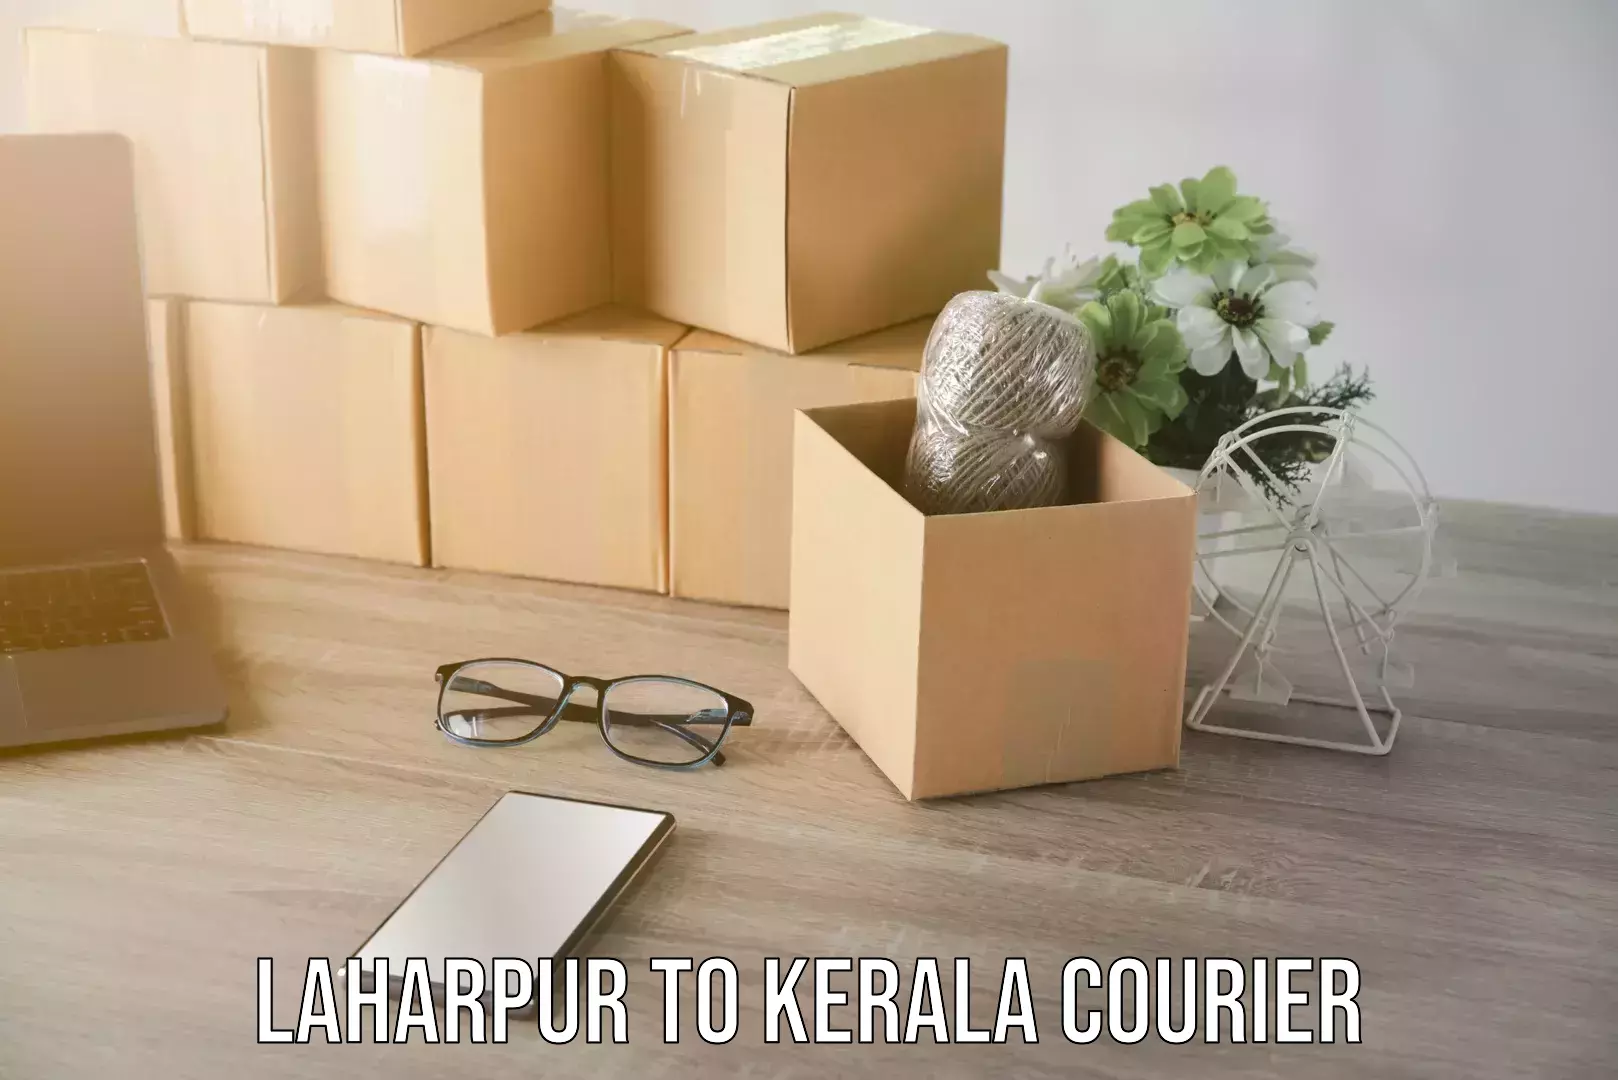 Trusted moving company in Laharpur to Kerala